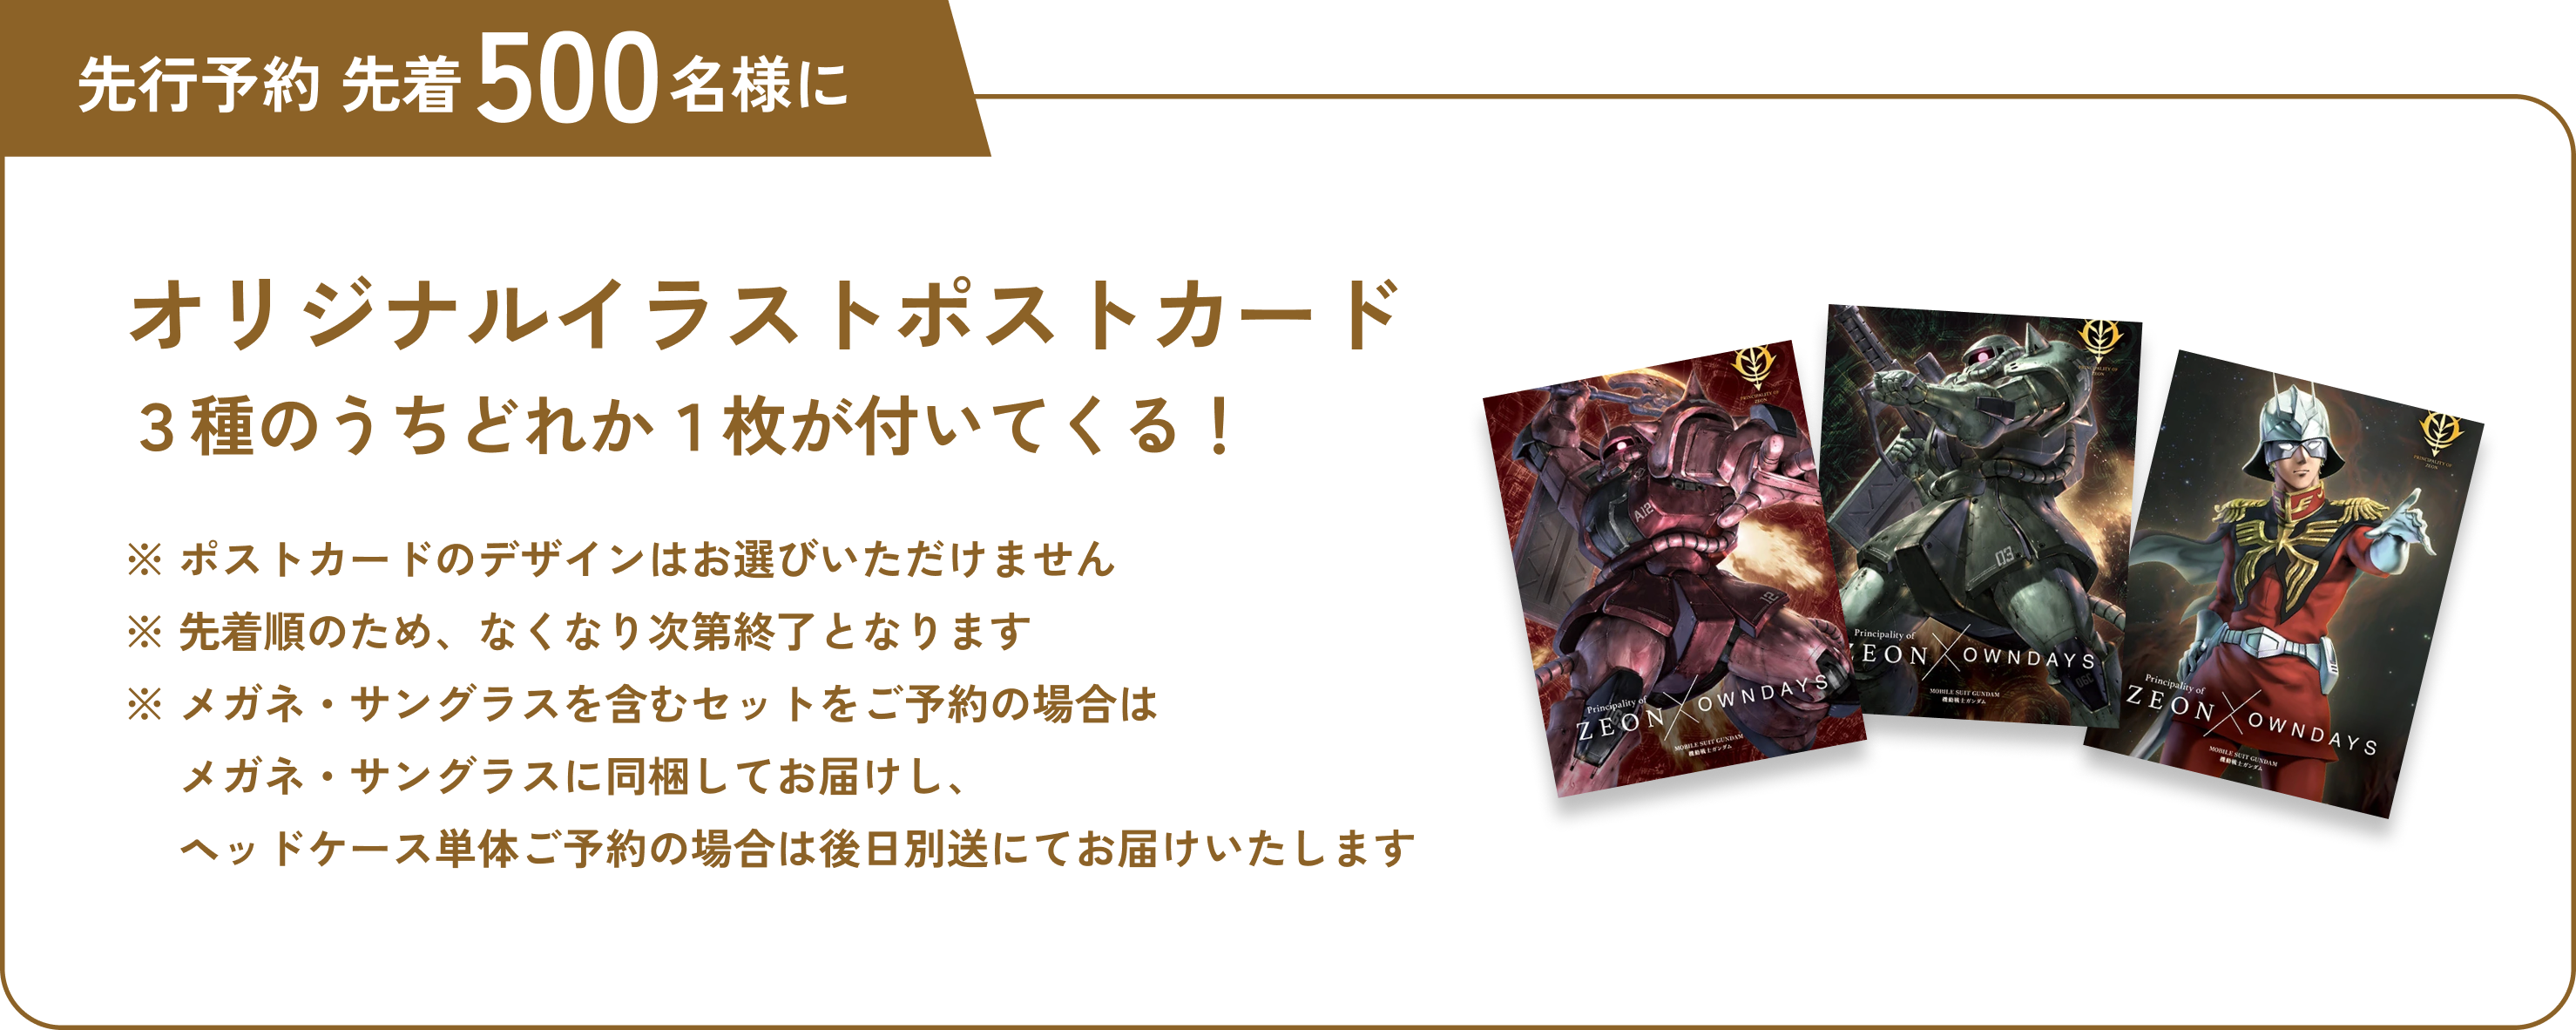 [Exclusive to the first 70 pre-orders ] Collectible Character Postcard